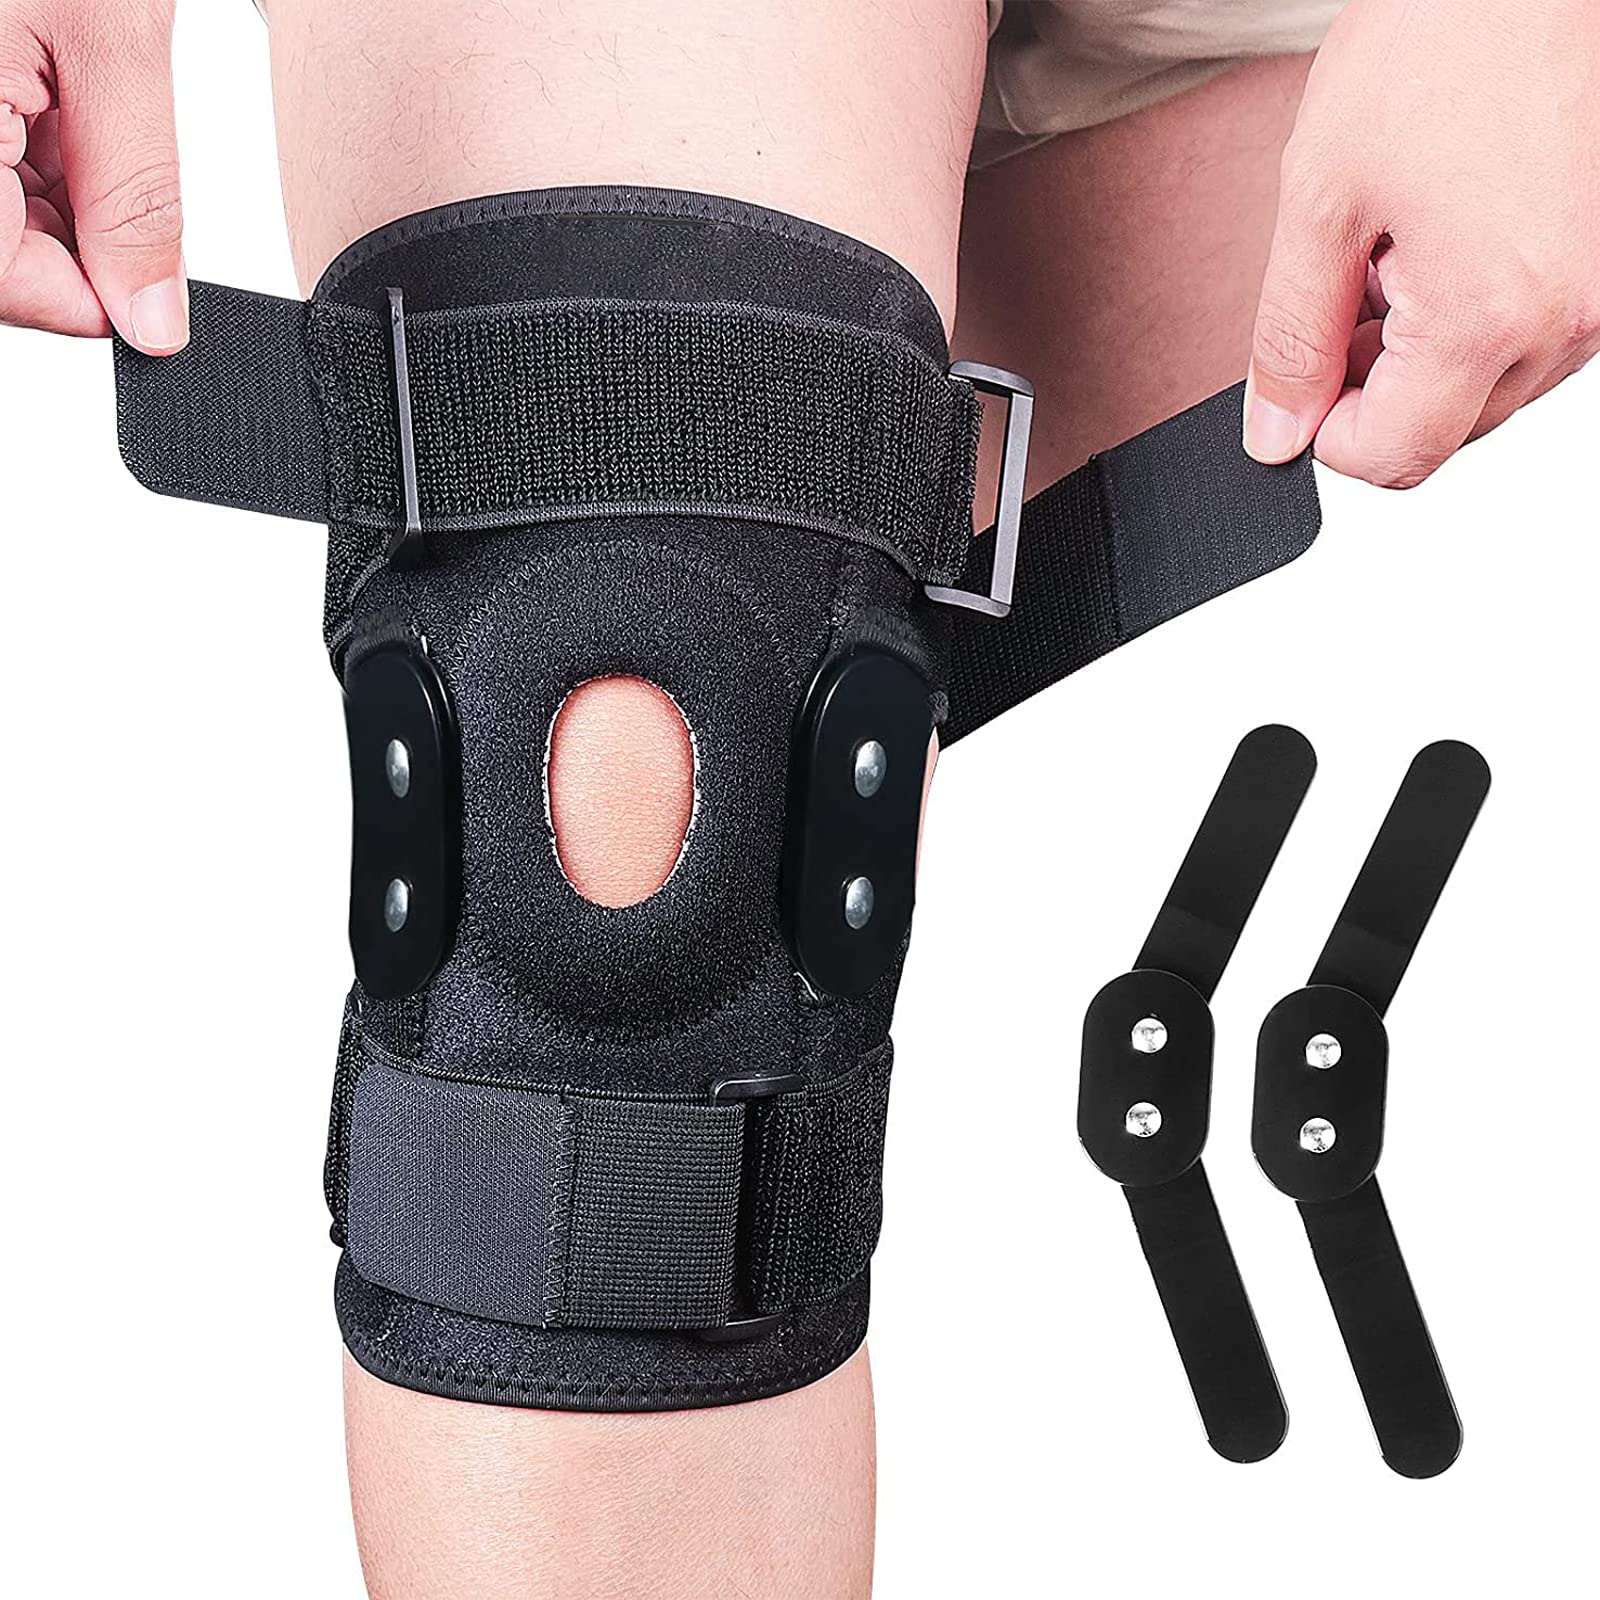  Hinged Knee Brace, Adjustable Knee Support Wrap for Men and  Women, Pain Relief Swelling and Inflammation, Patellar Tendon Support Sleeve  for Helping Relieve Strains, Sprains, ACL, MCL Injuries : Health 